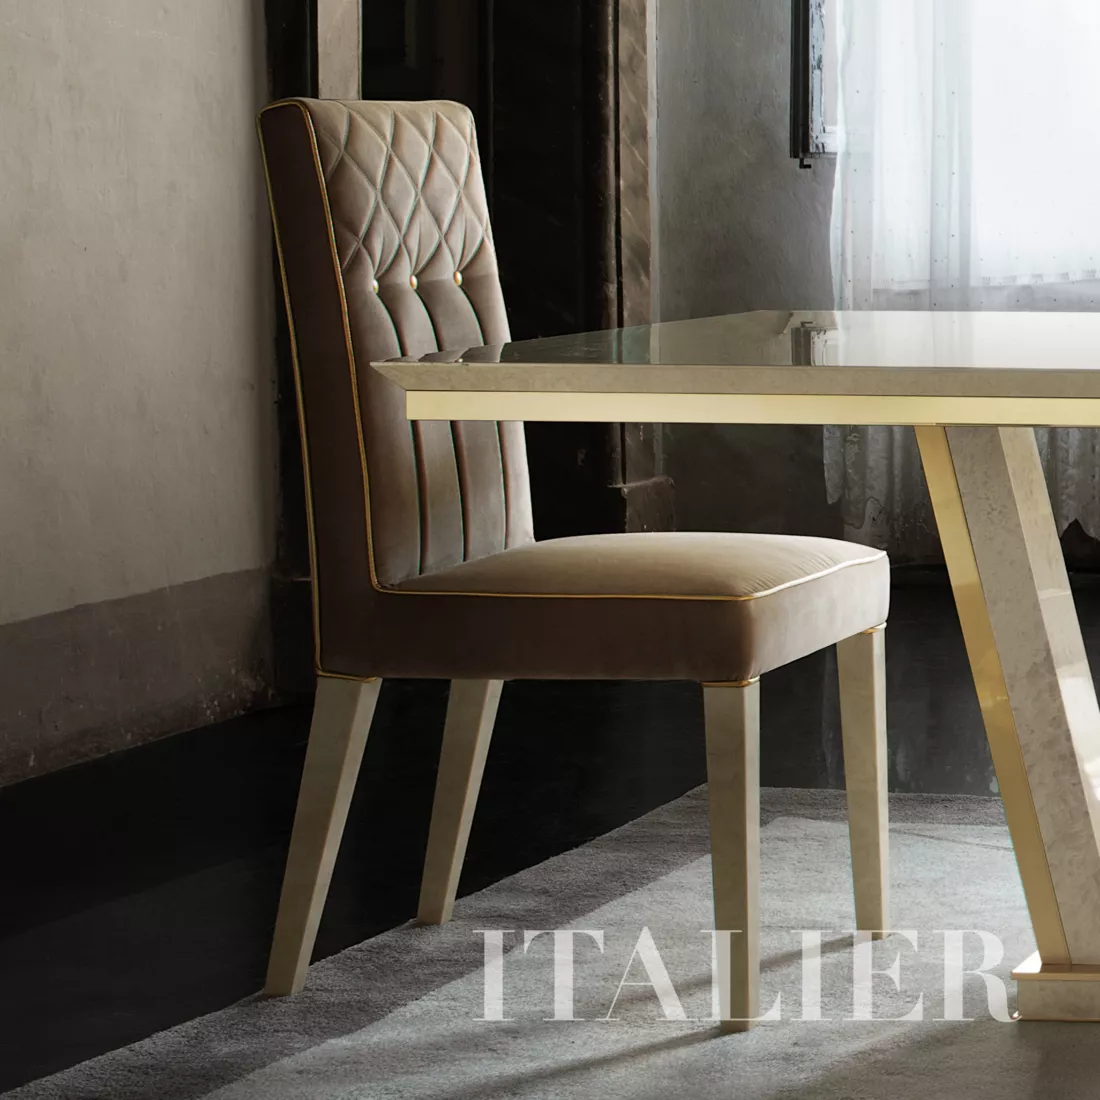 Sipario table with chairs - kopiezzjhtgrd